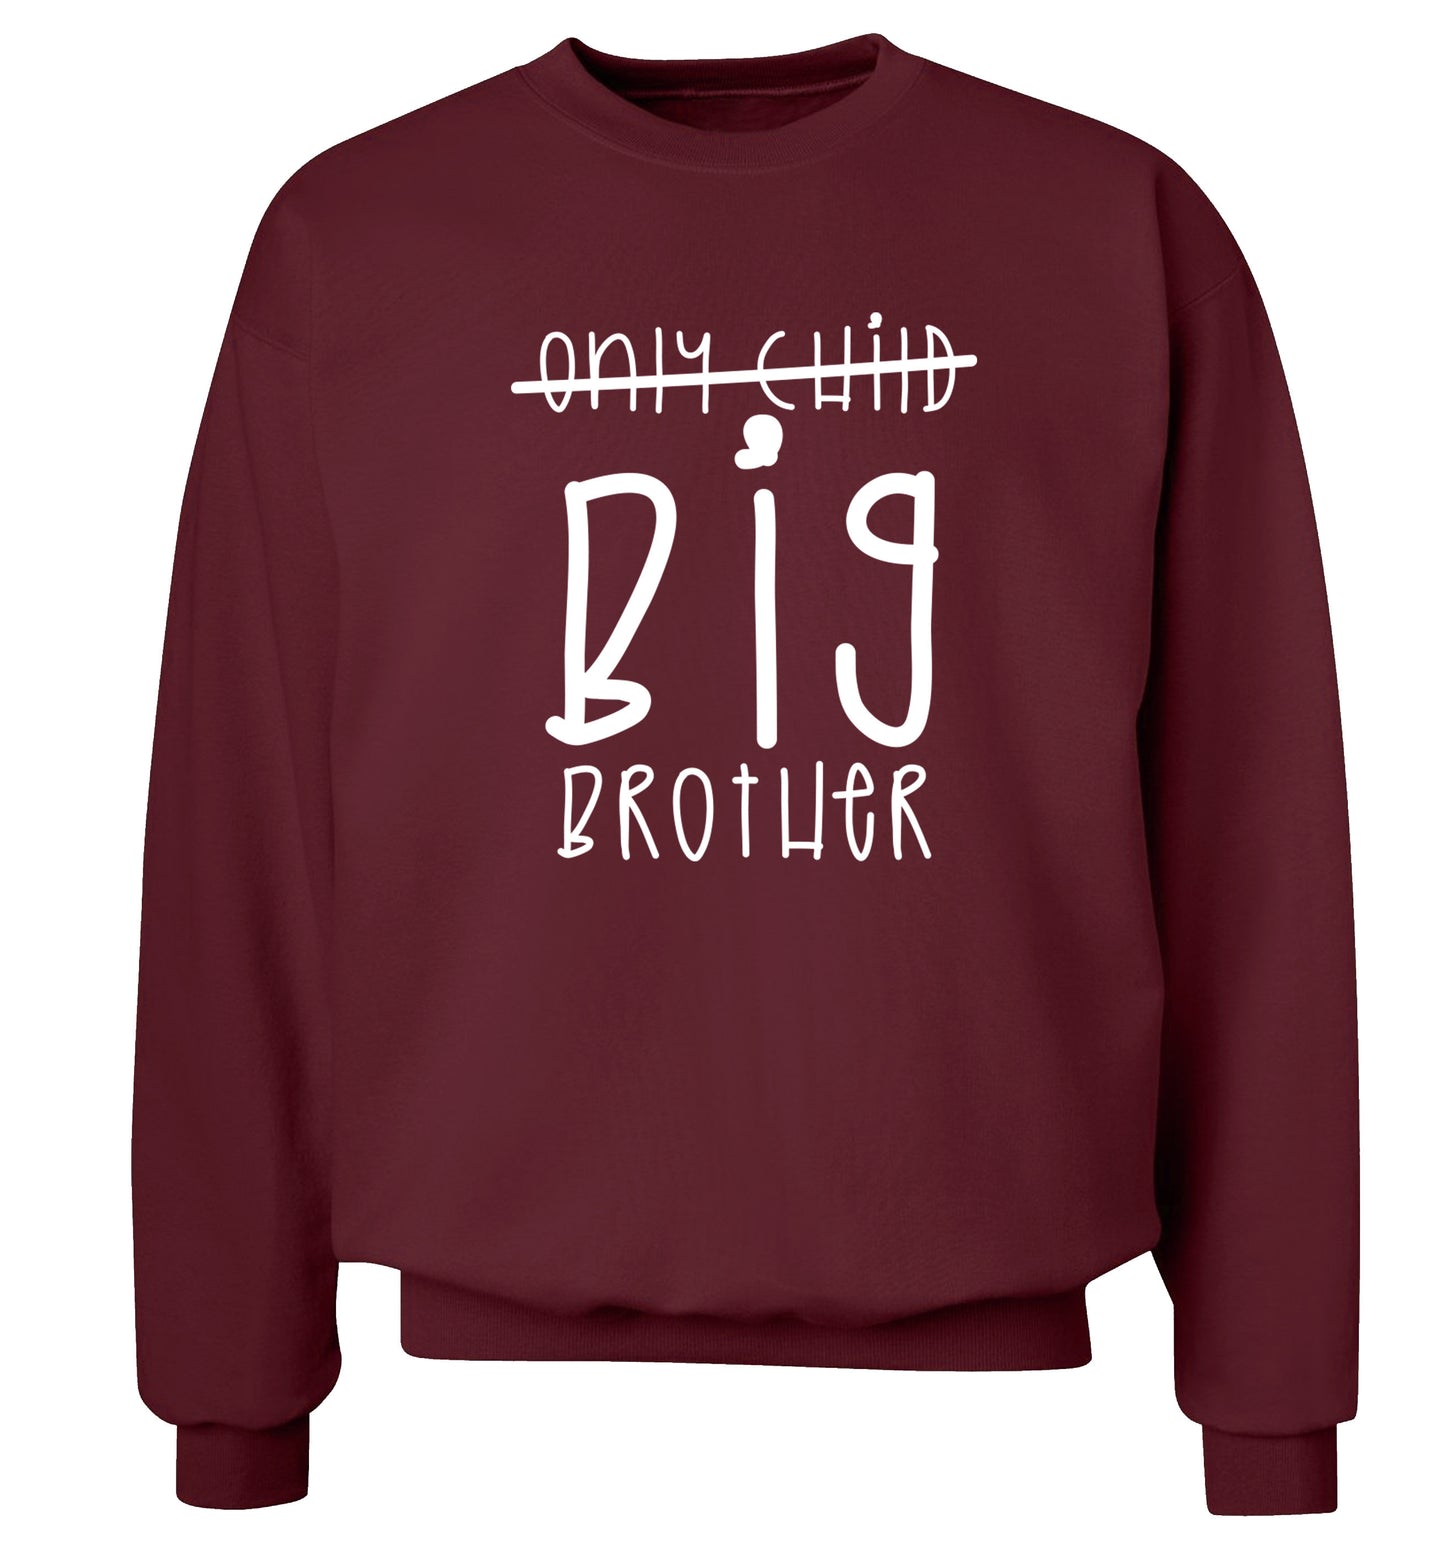 Only child big brother Adult's unisex maroon Sweater 2XL